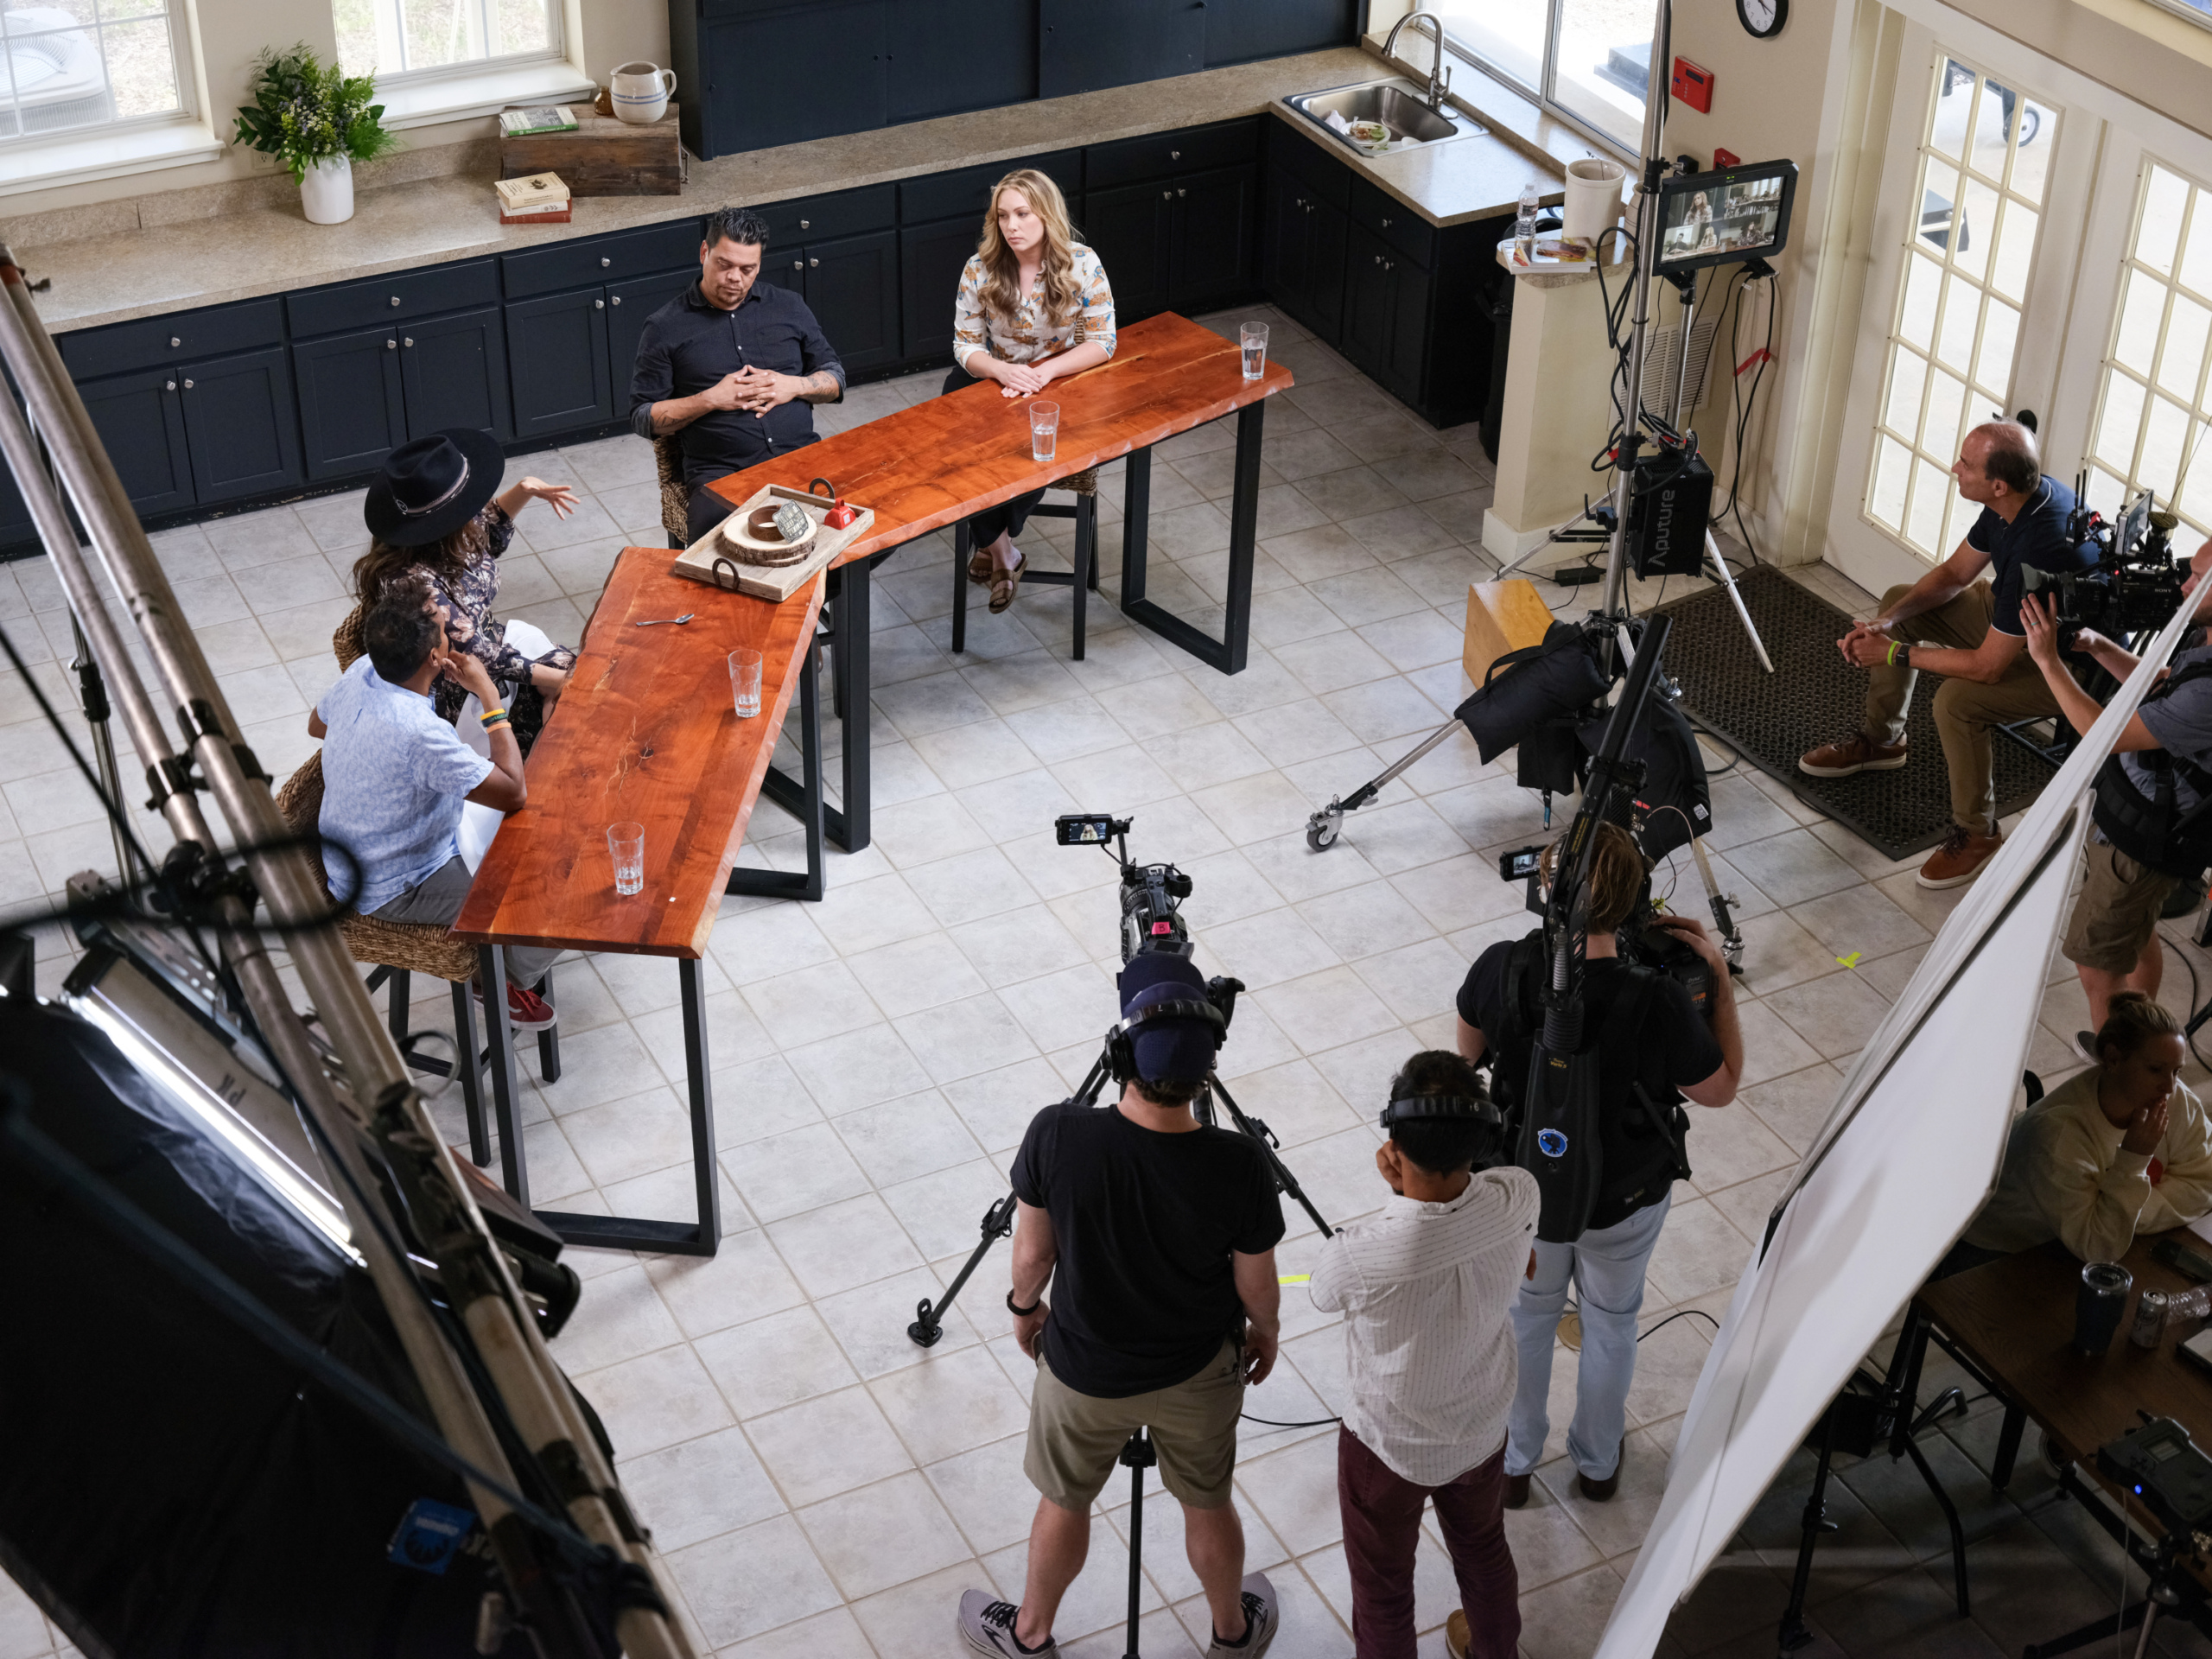 Case Study: Using Live to Tape to Film 3 Reality TV Episodes in 1 Day